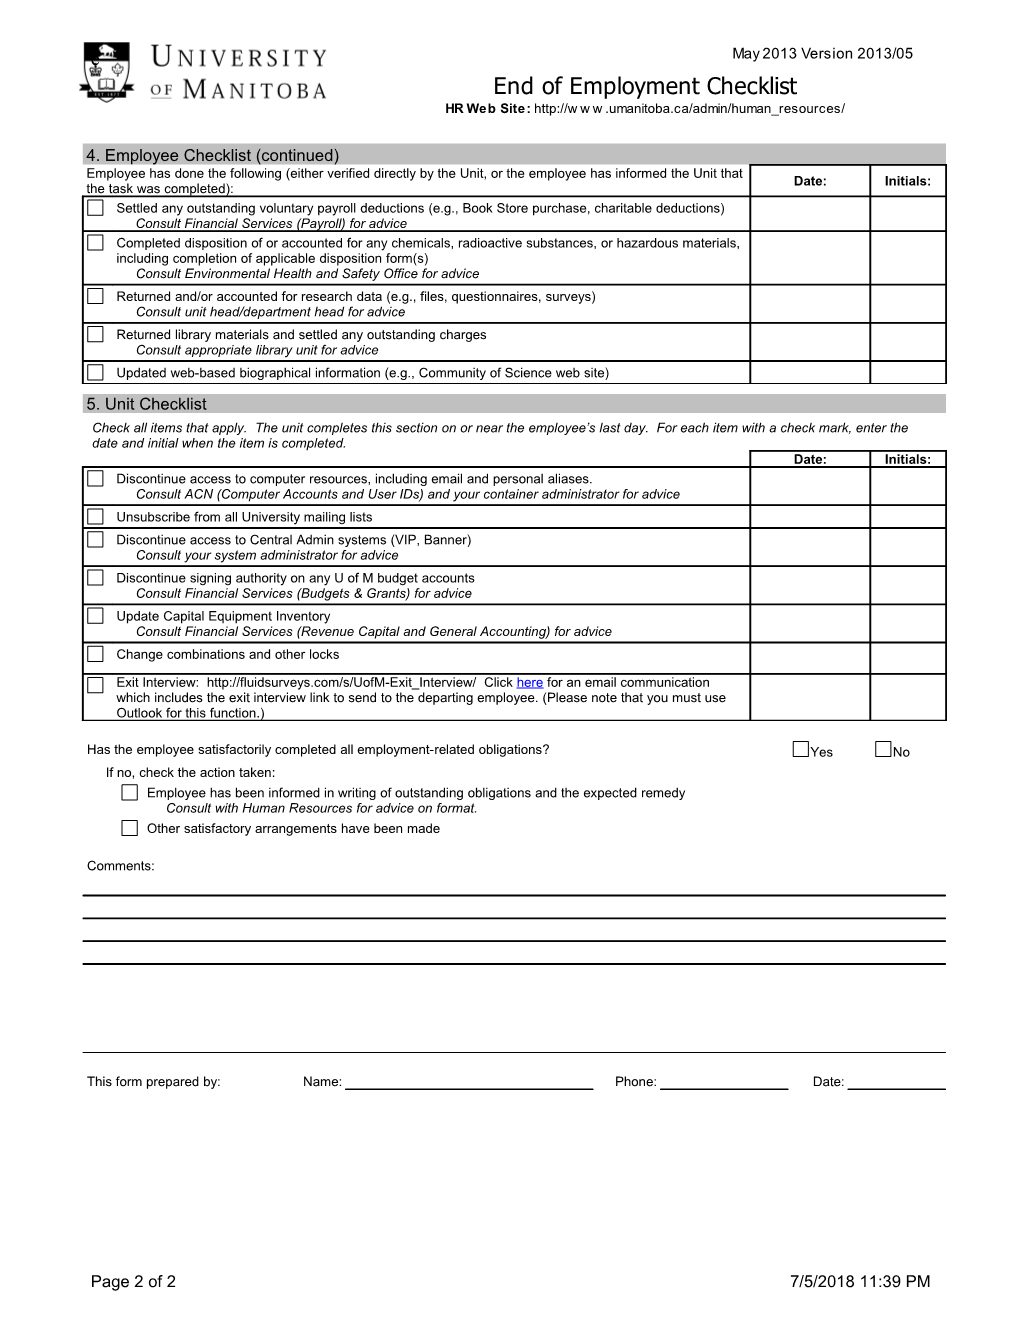 Complete This Form If the Employee Ceases All Employment with the University. Processing